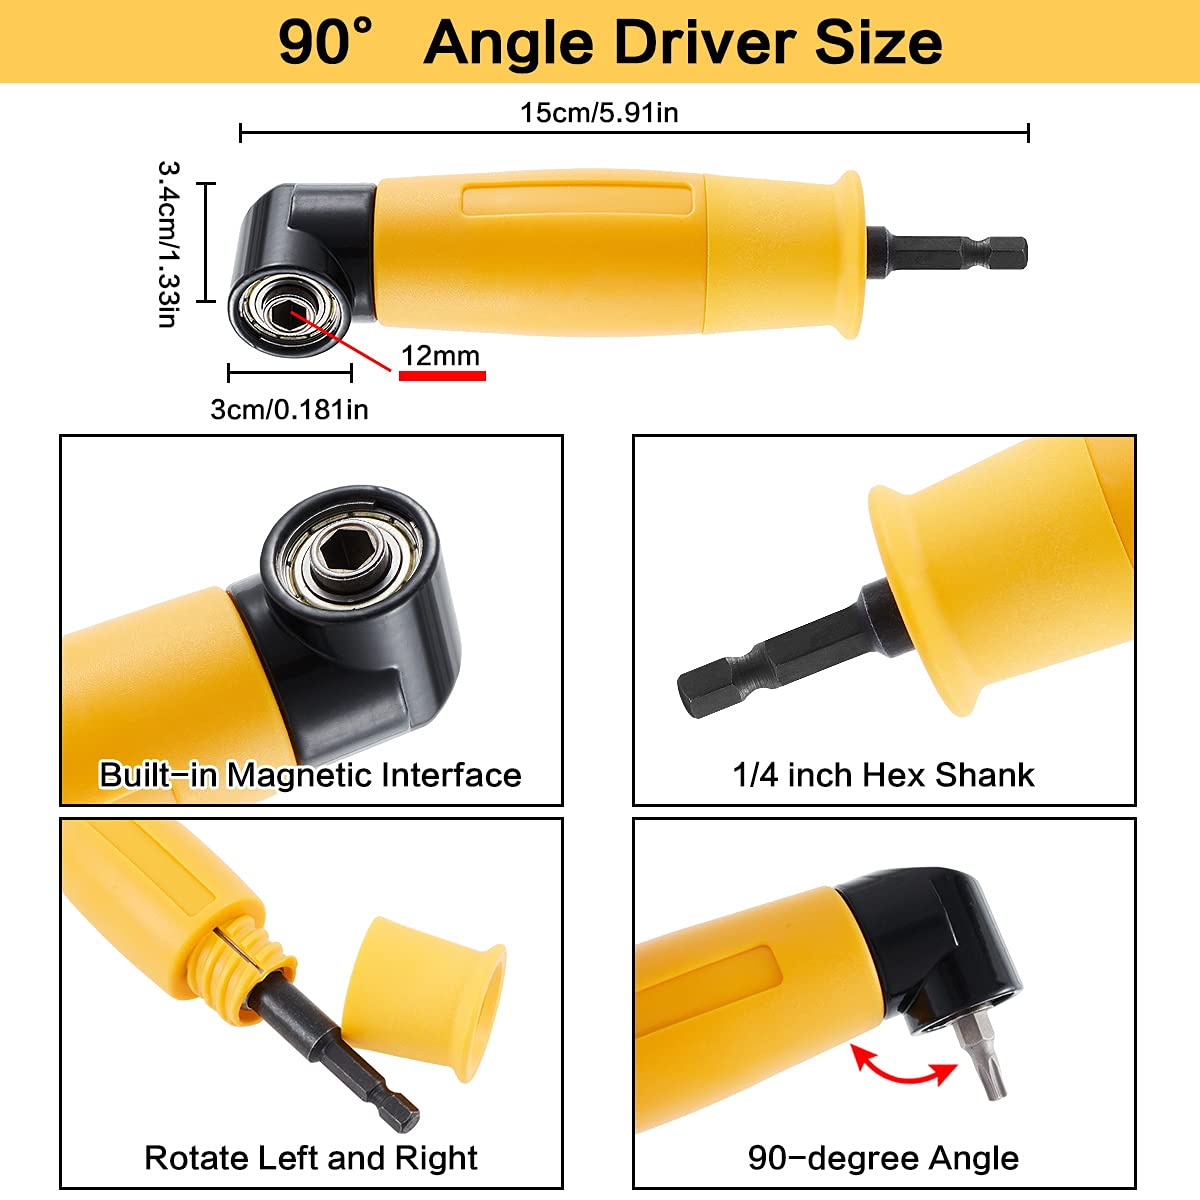 105 Degree Right Angle Driver Angle Extension Power India